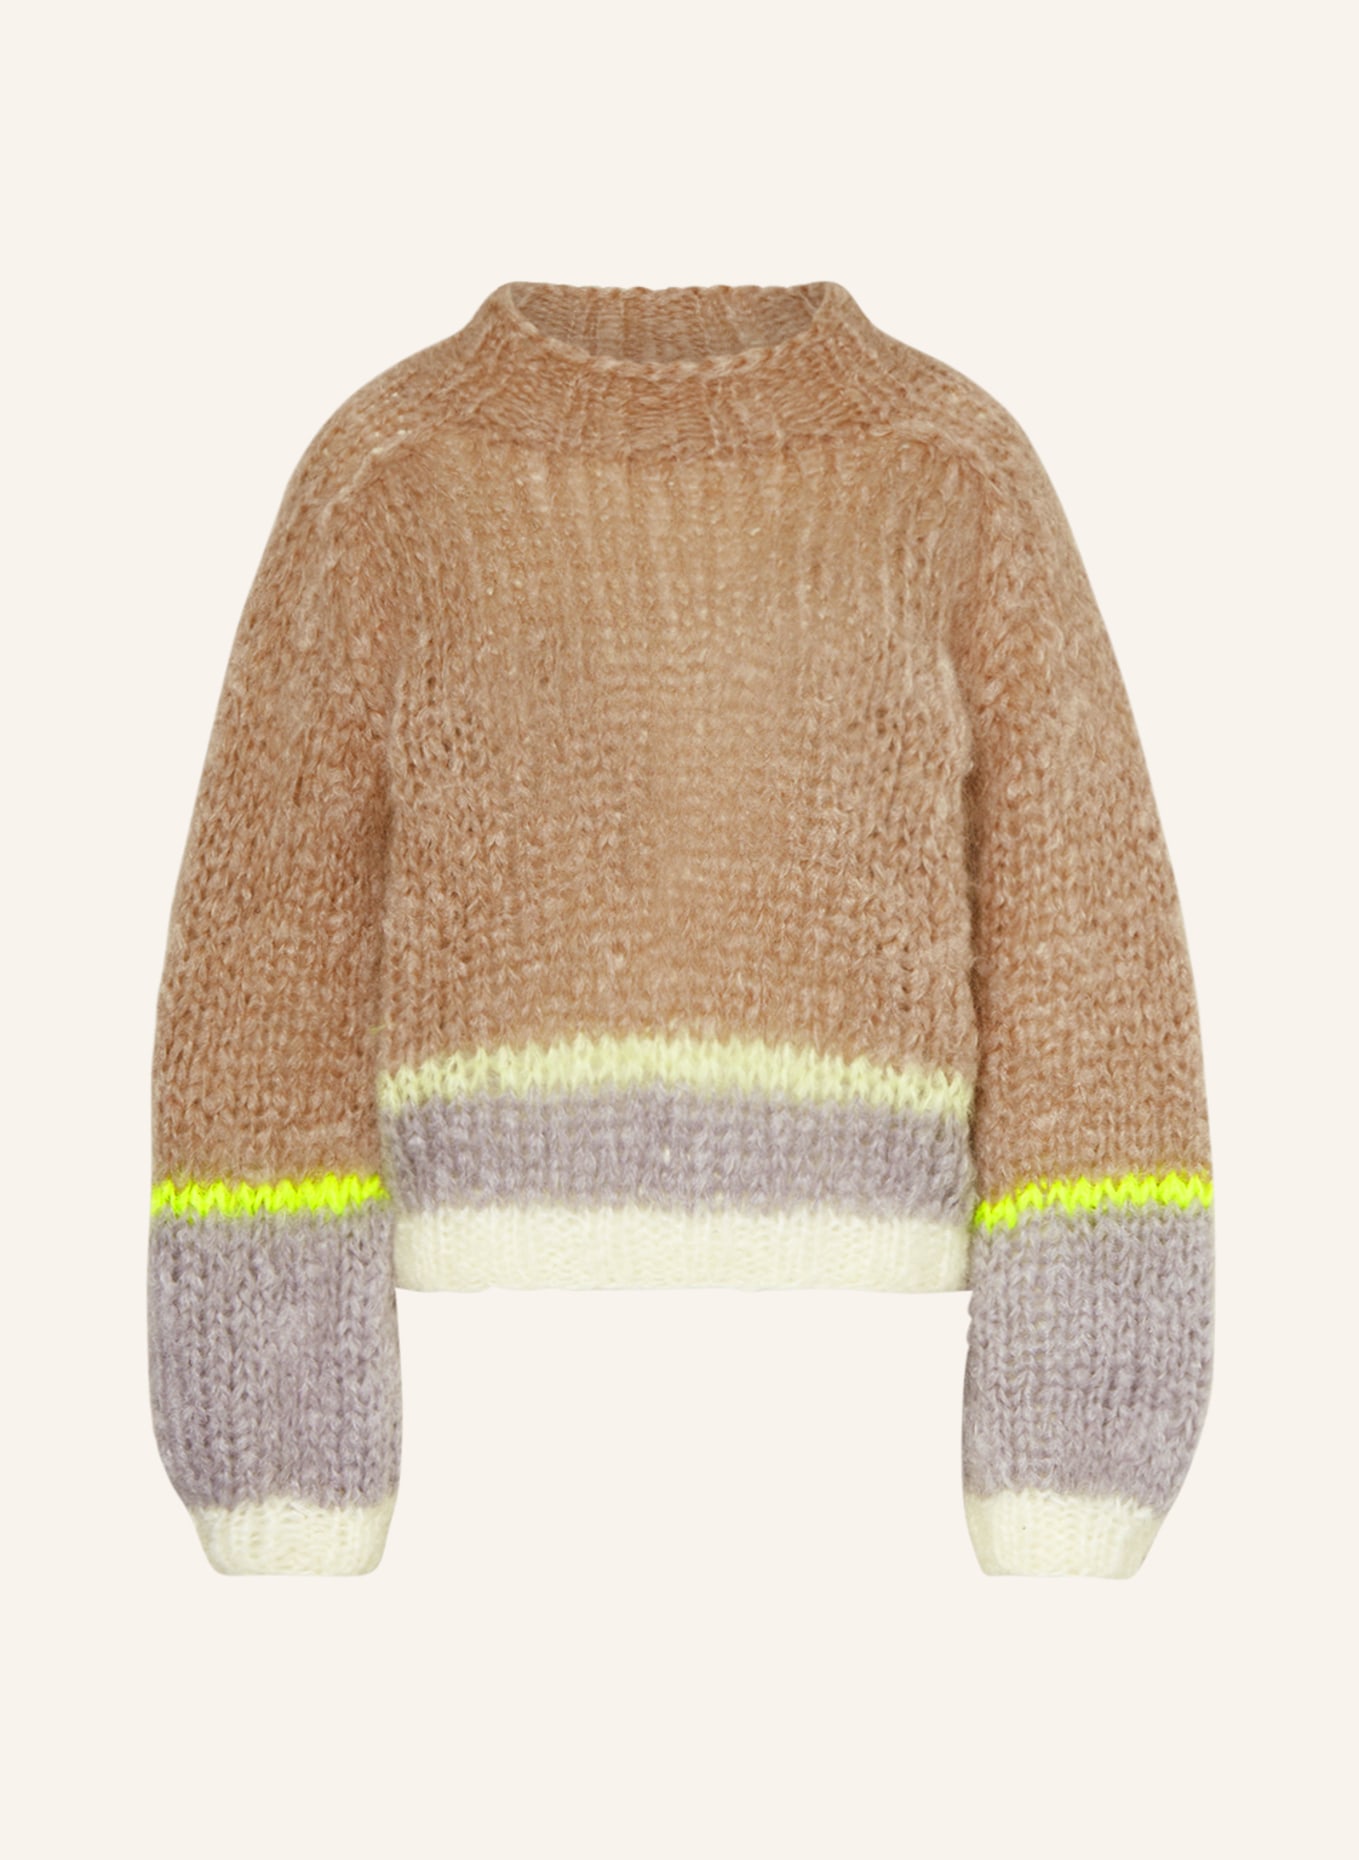 MAIAMI Mohair sweater, Color: BEIGE/ GRAY (Image 1)